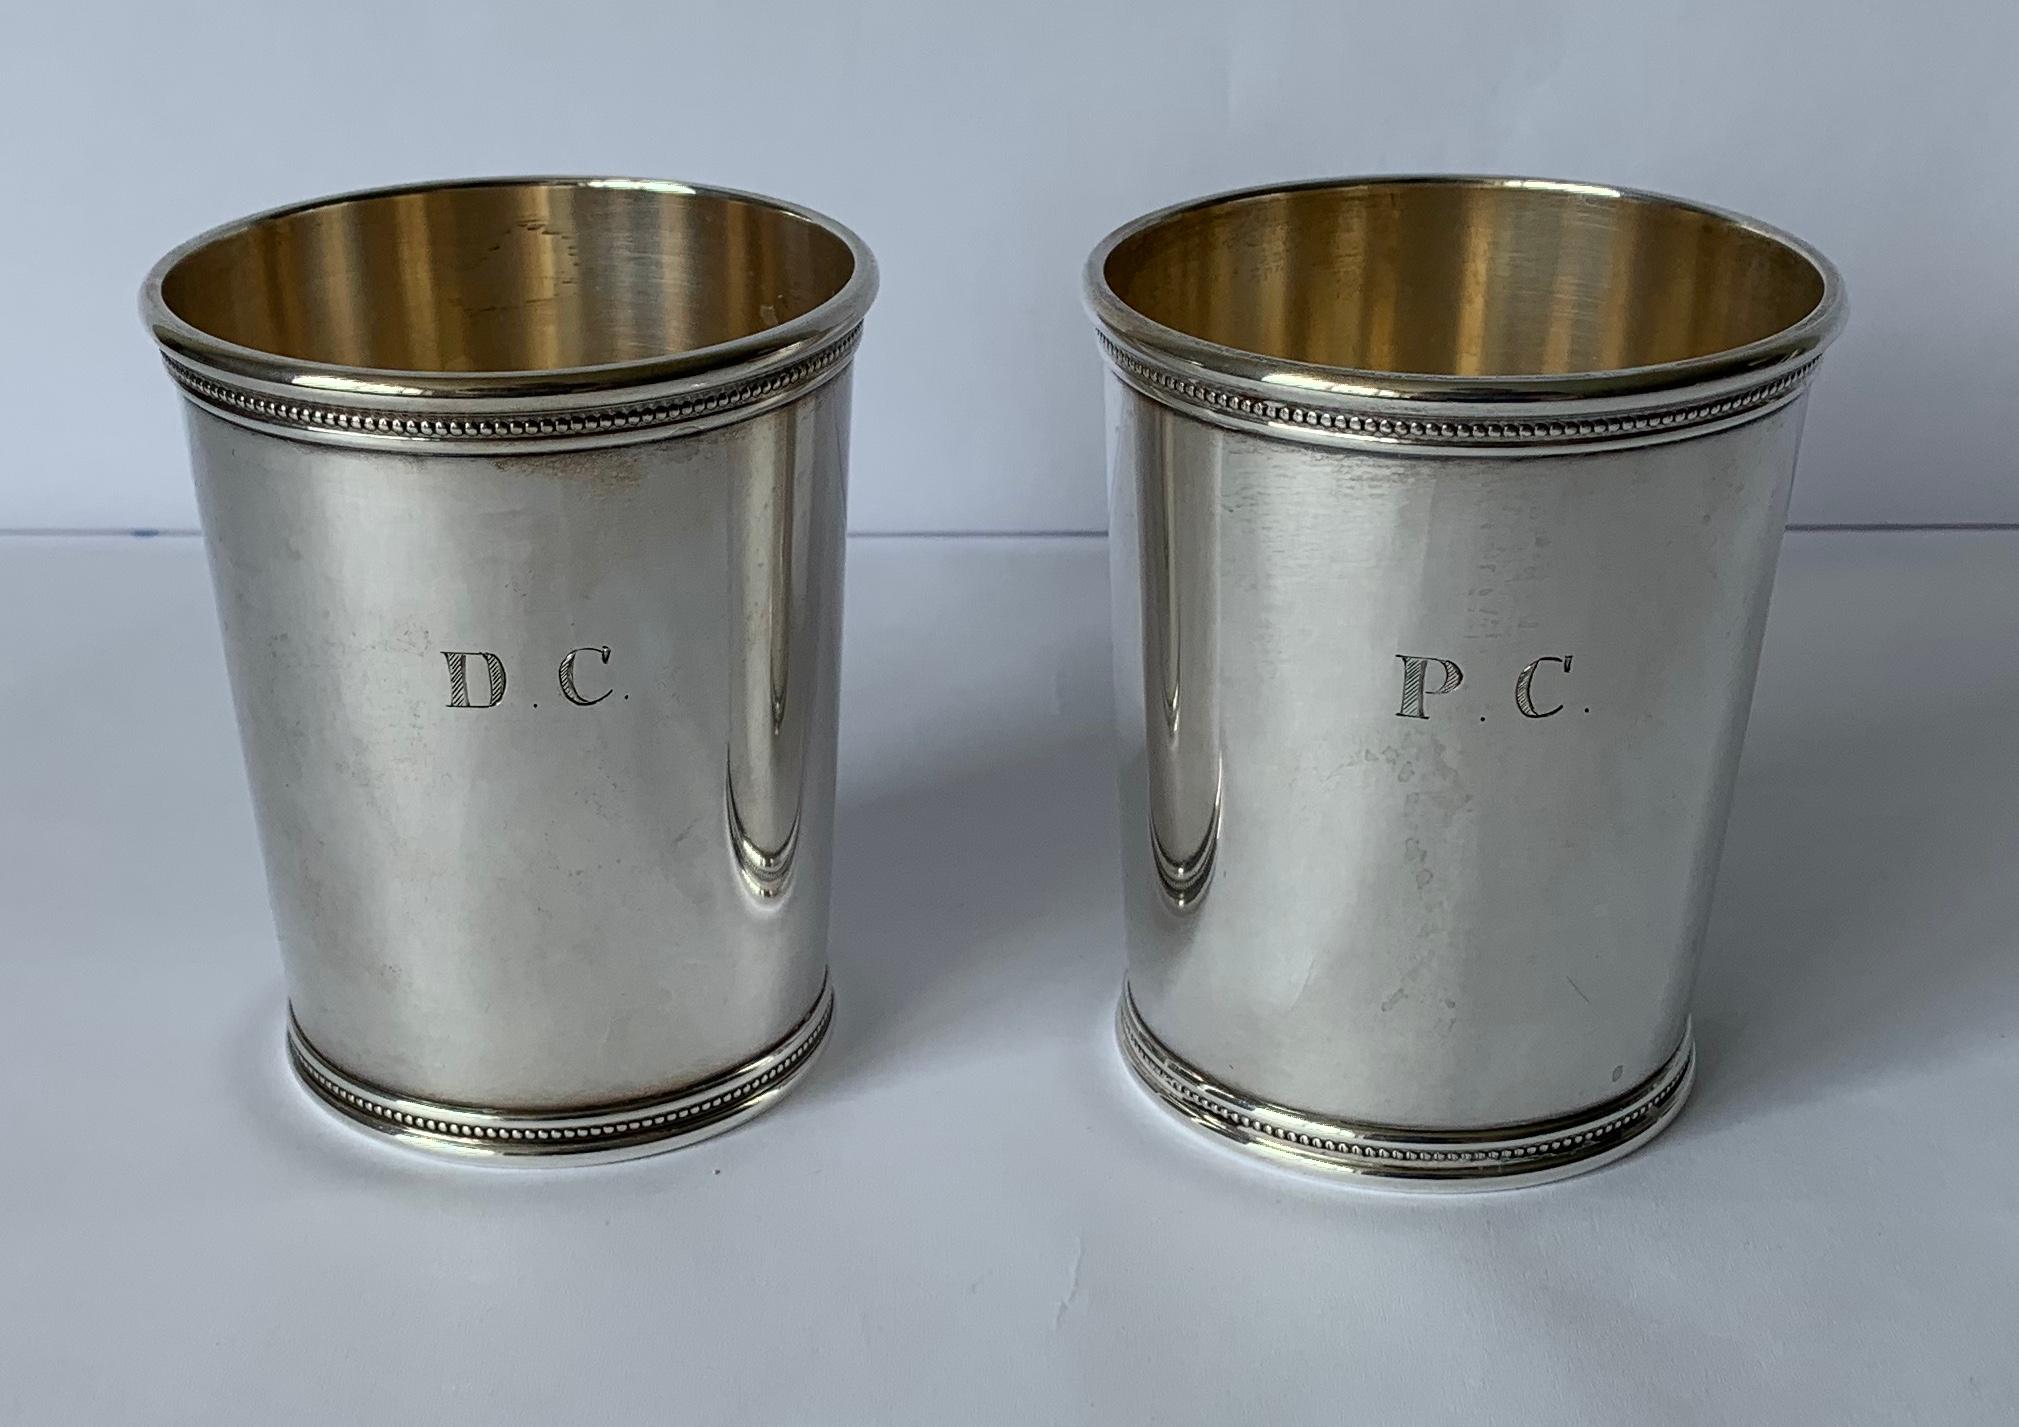 Pair of Mark Scearce LBJ 1960s sterling silver julep cups. Stamped on the underside. Gold washed interior. Each cup is engraved with monogramed D.C. and P.C. Each cup comes with flannel storage bag. Total weight is 9.59 Troy oz.